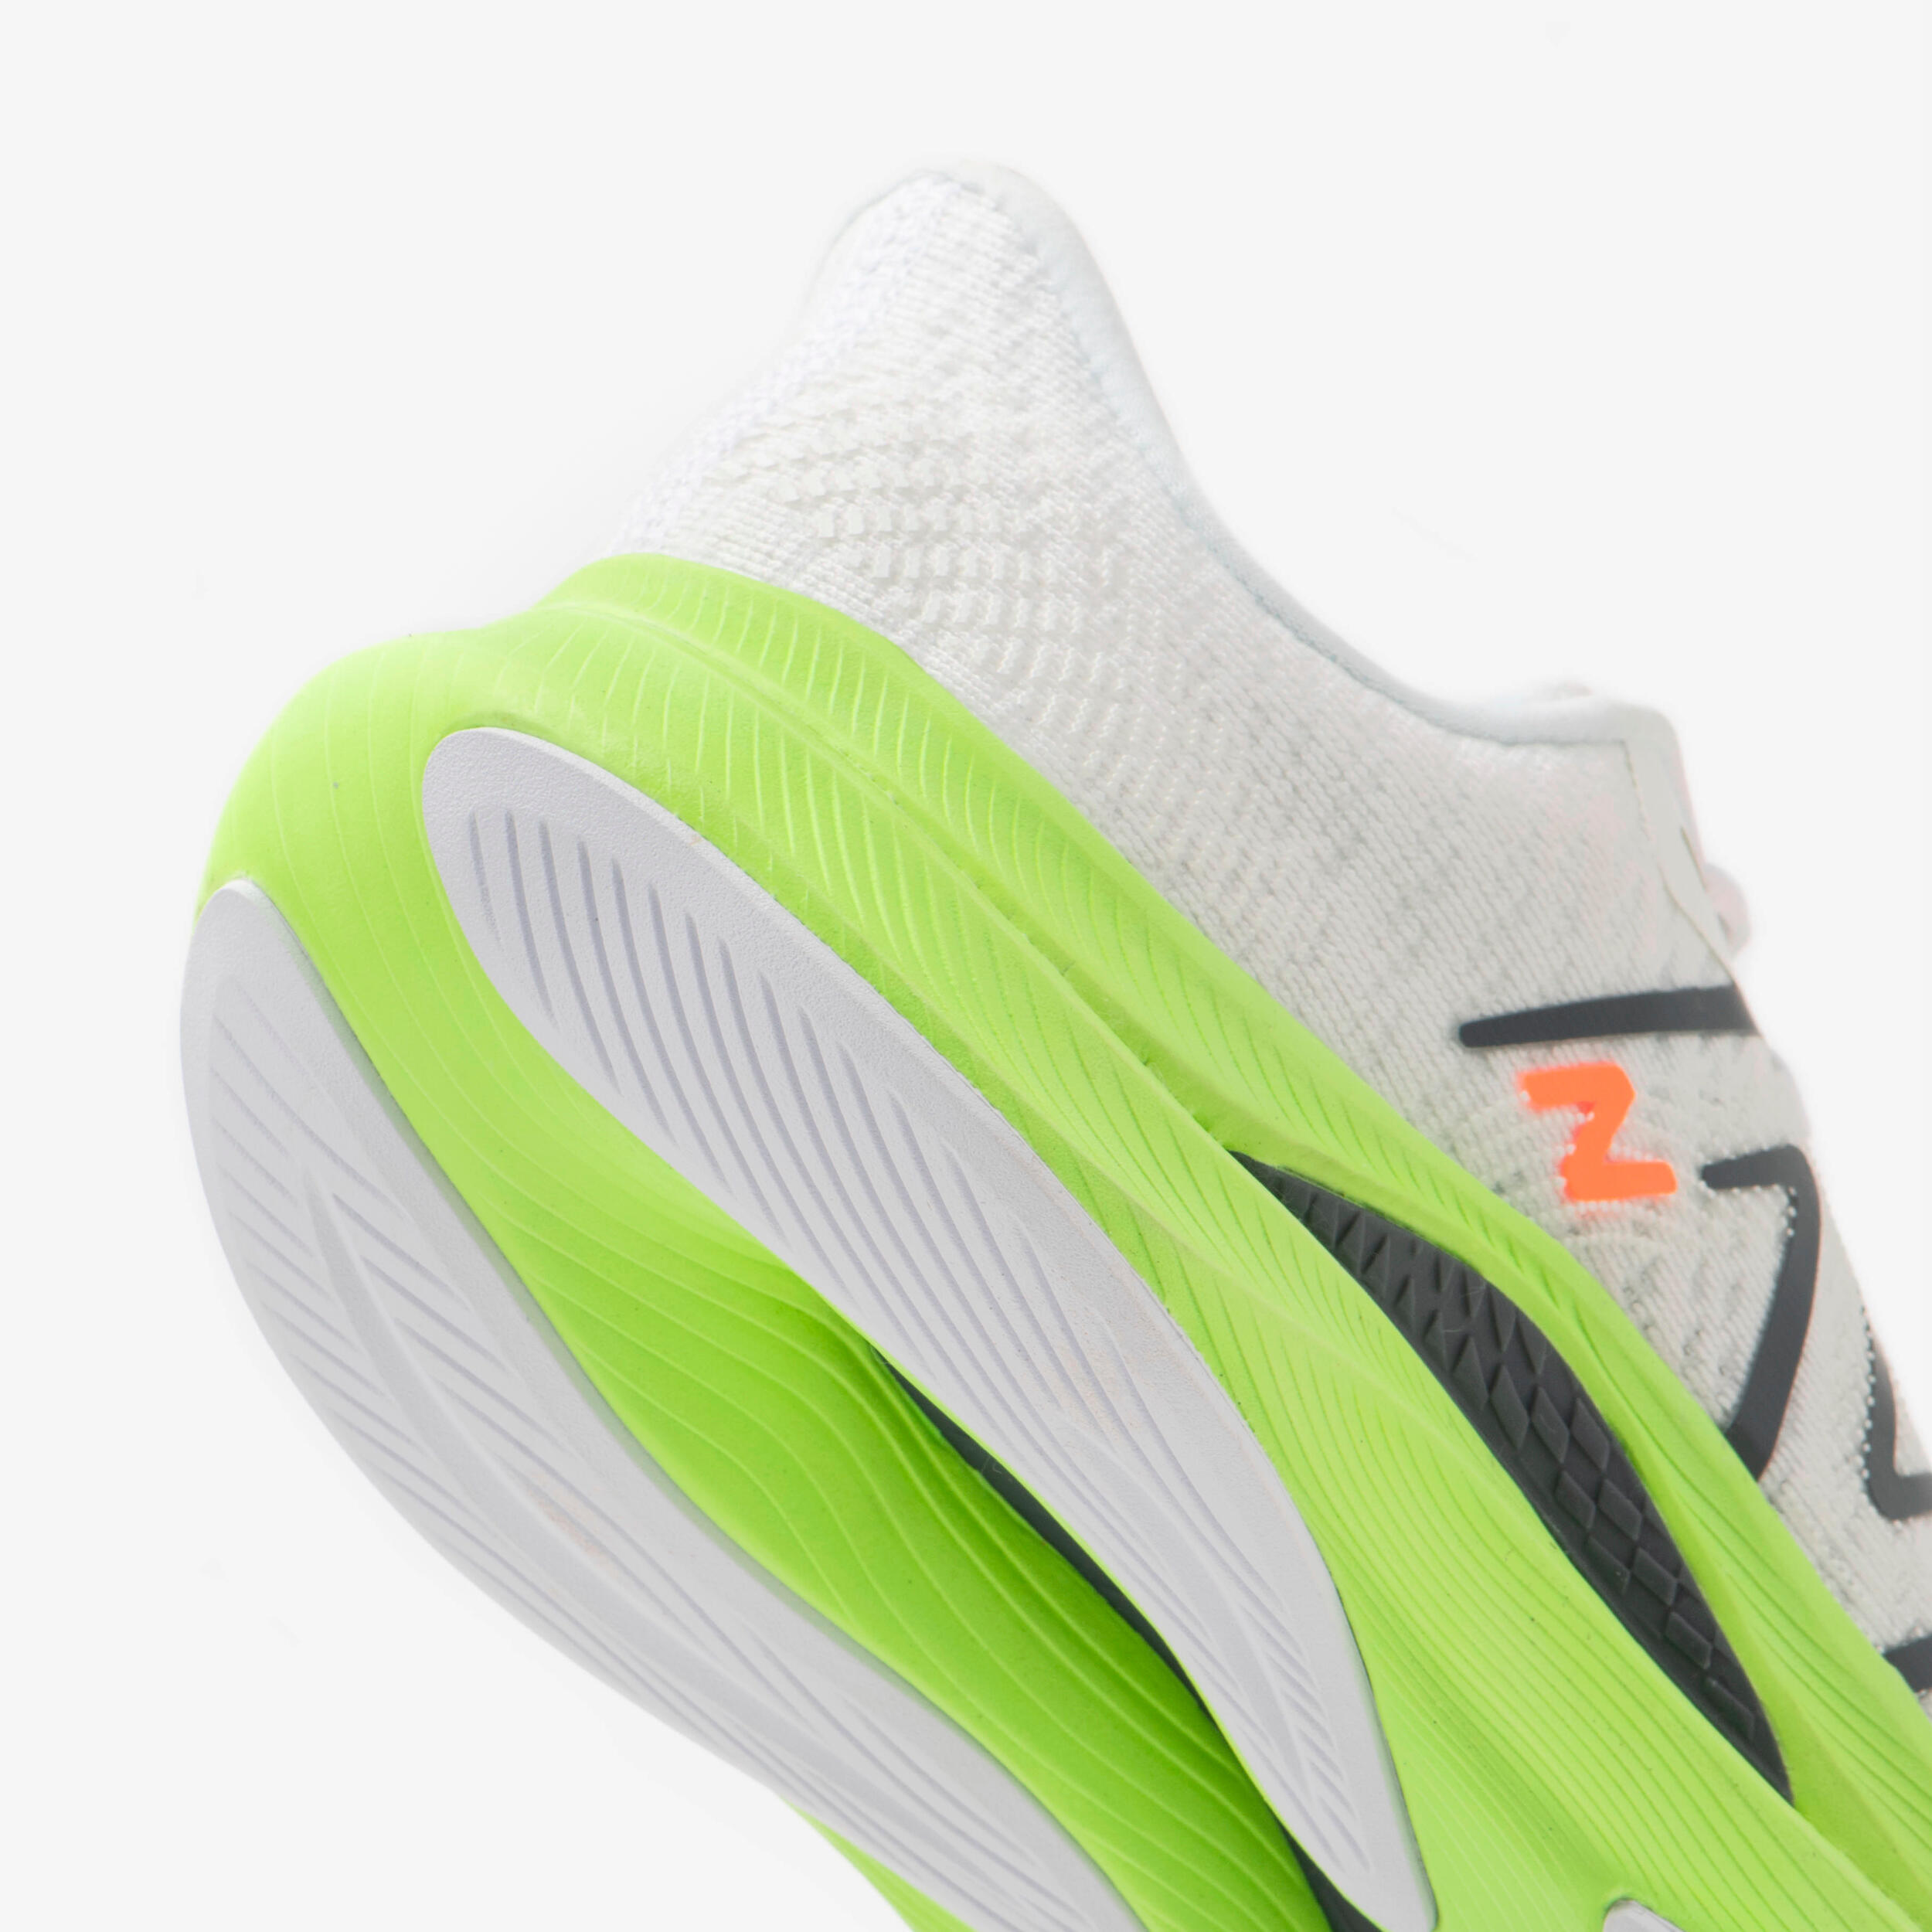 WOMEN'S NEW BALANCE FUELCELL PROPEL V4 RUNNING SHOES - WHITE AND NEON GREEN 4/7